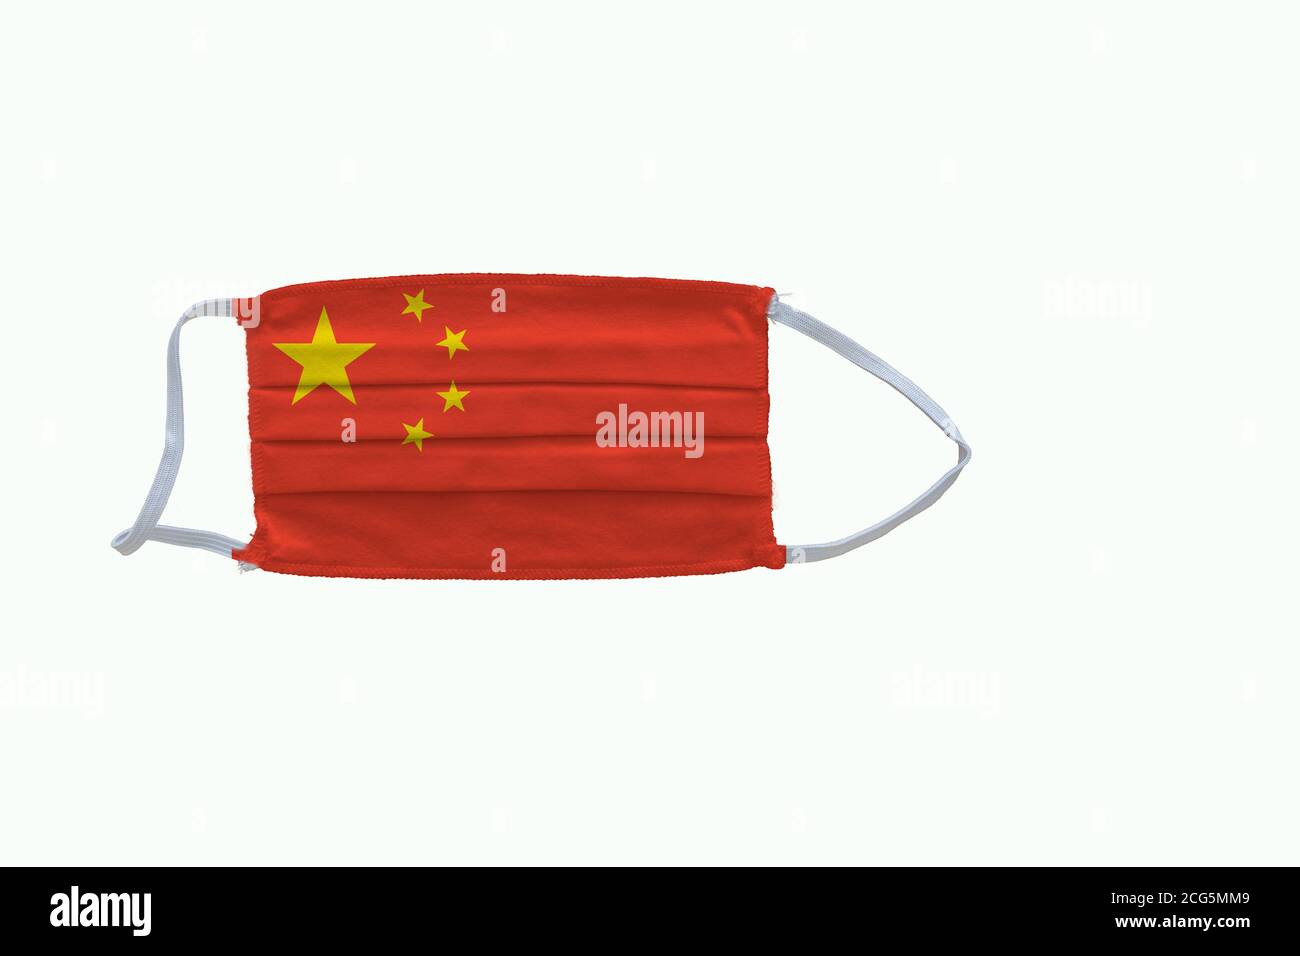 Chinese flag design Covid-19 pandemic  virus face mask  on a white background with copy space Stock Photo